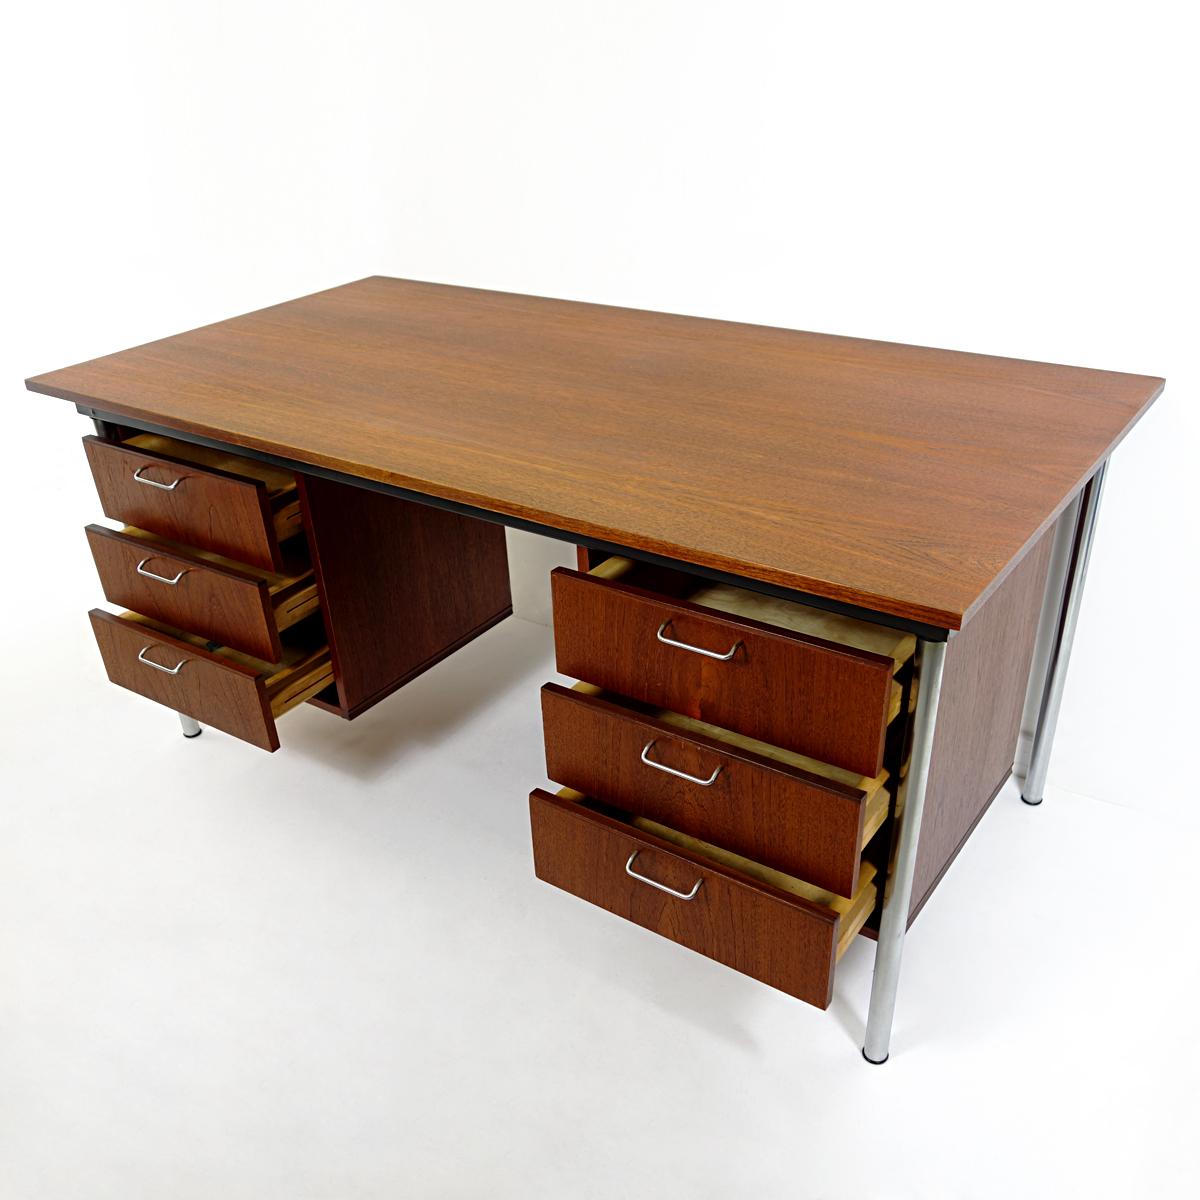 Mid-20th Century Mid-Century Modern Desk Designed by Cees Braakman for USM Pastoe For Sale